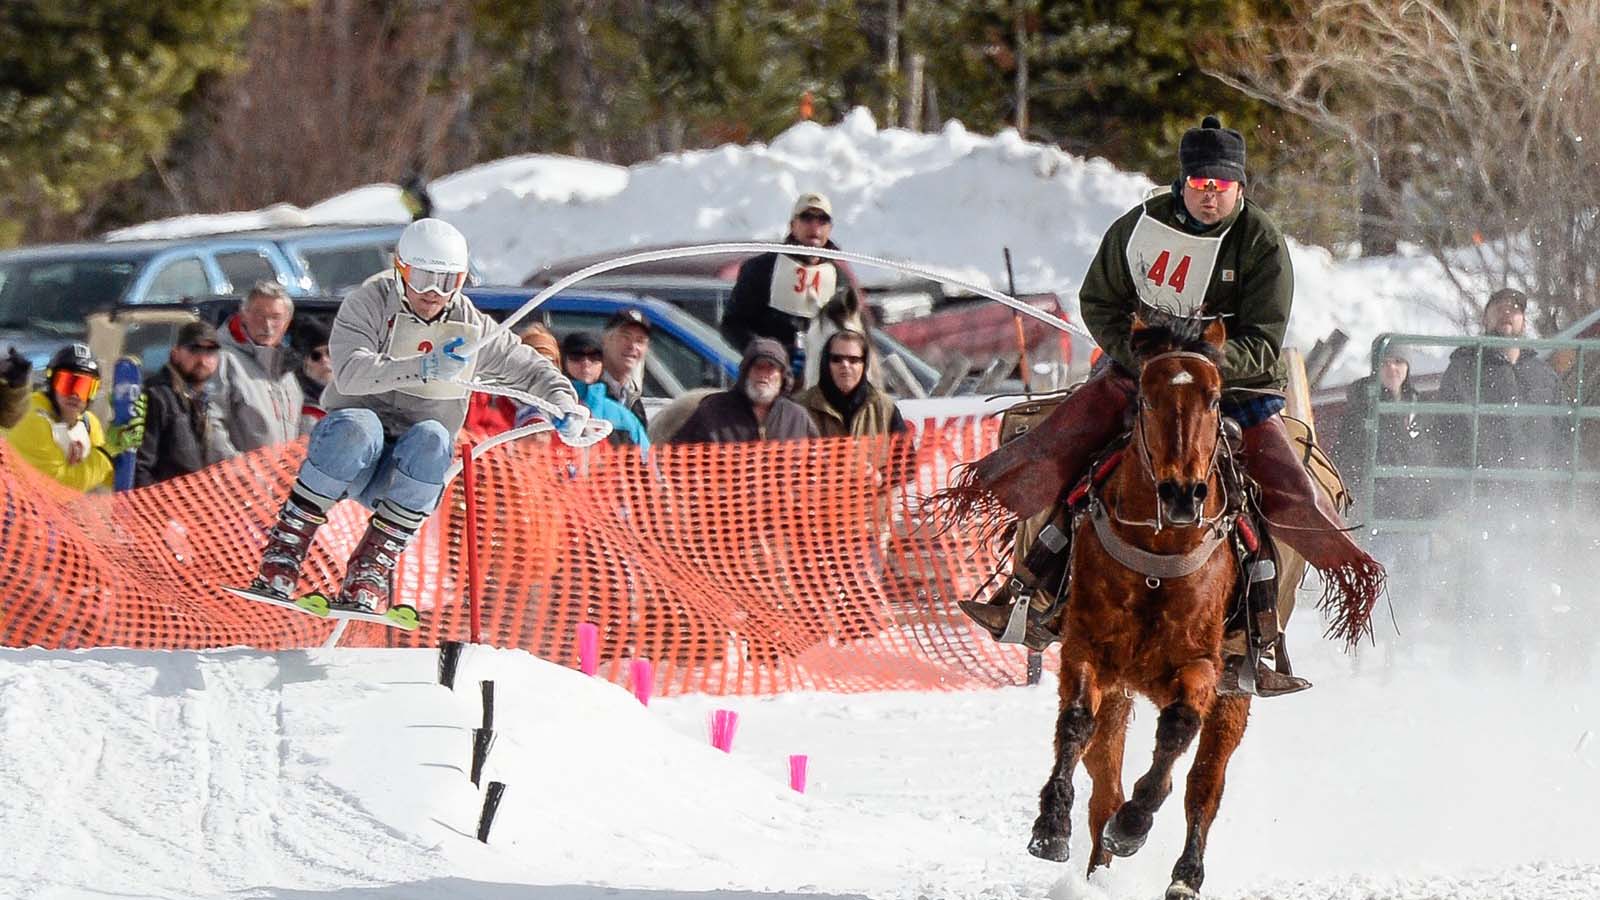 Skijoring in Wyoming: What Is It & Where Can You Watch?